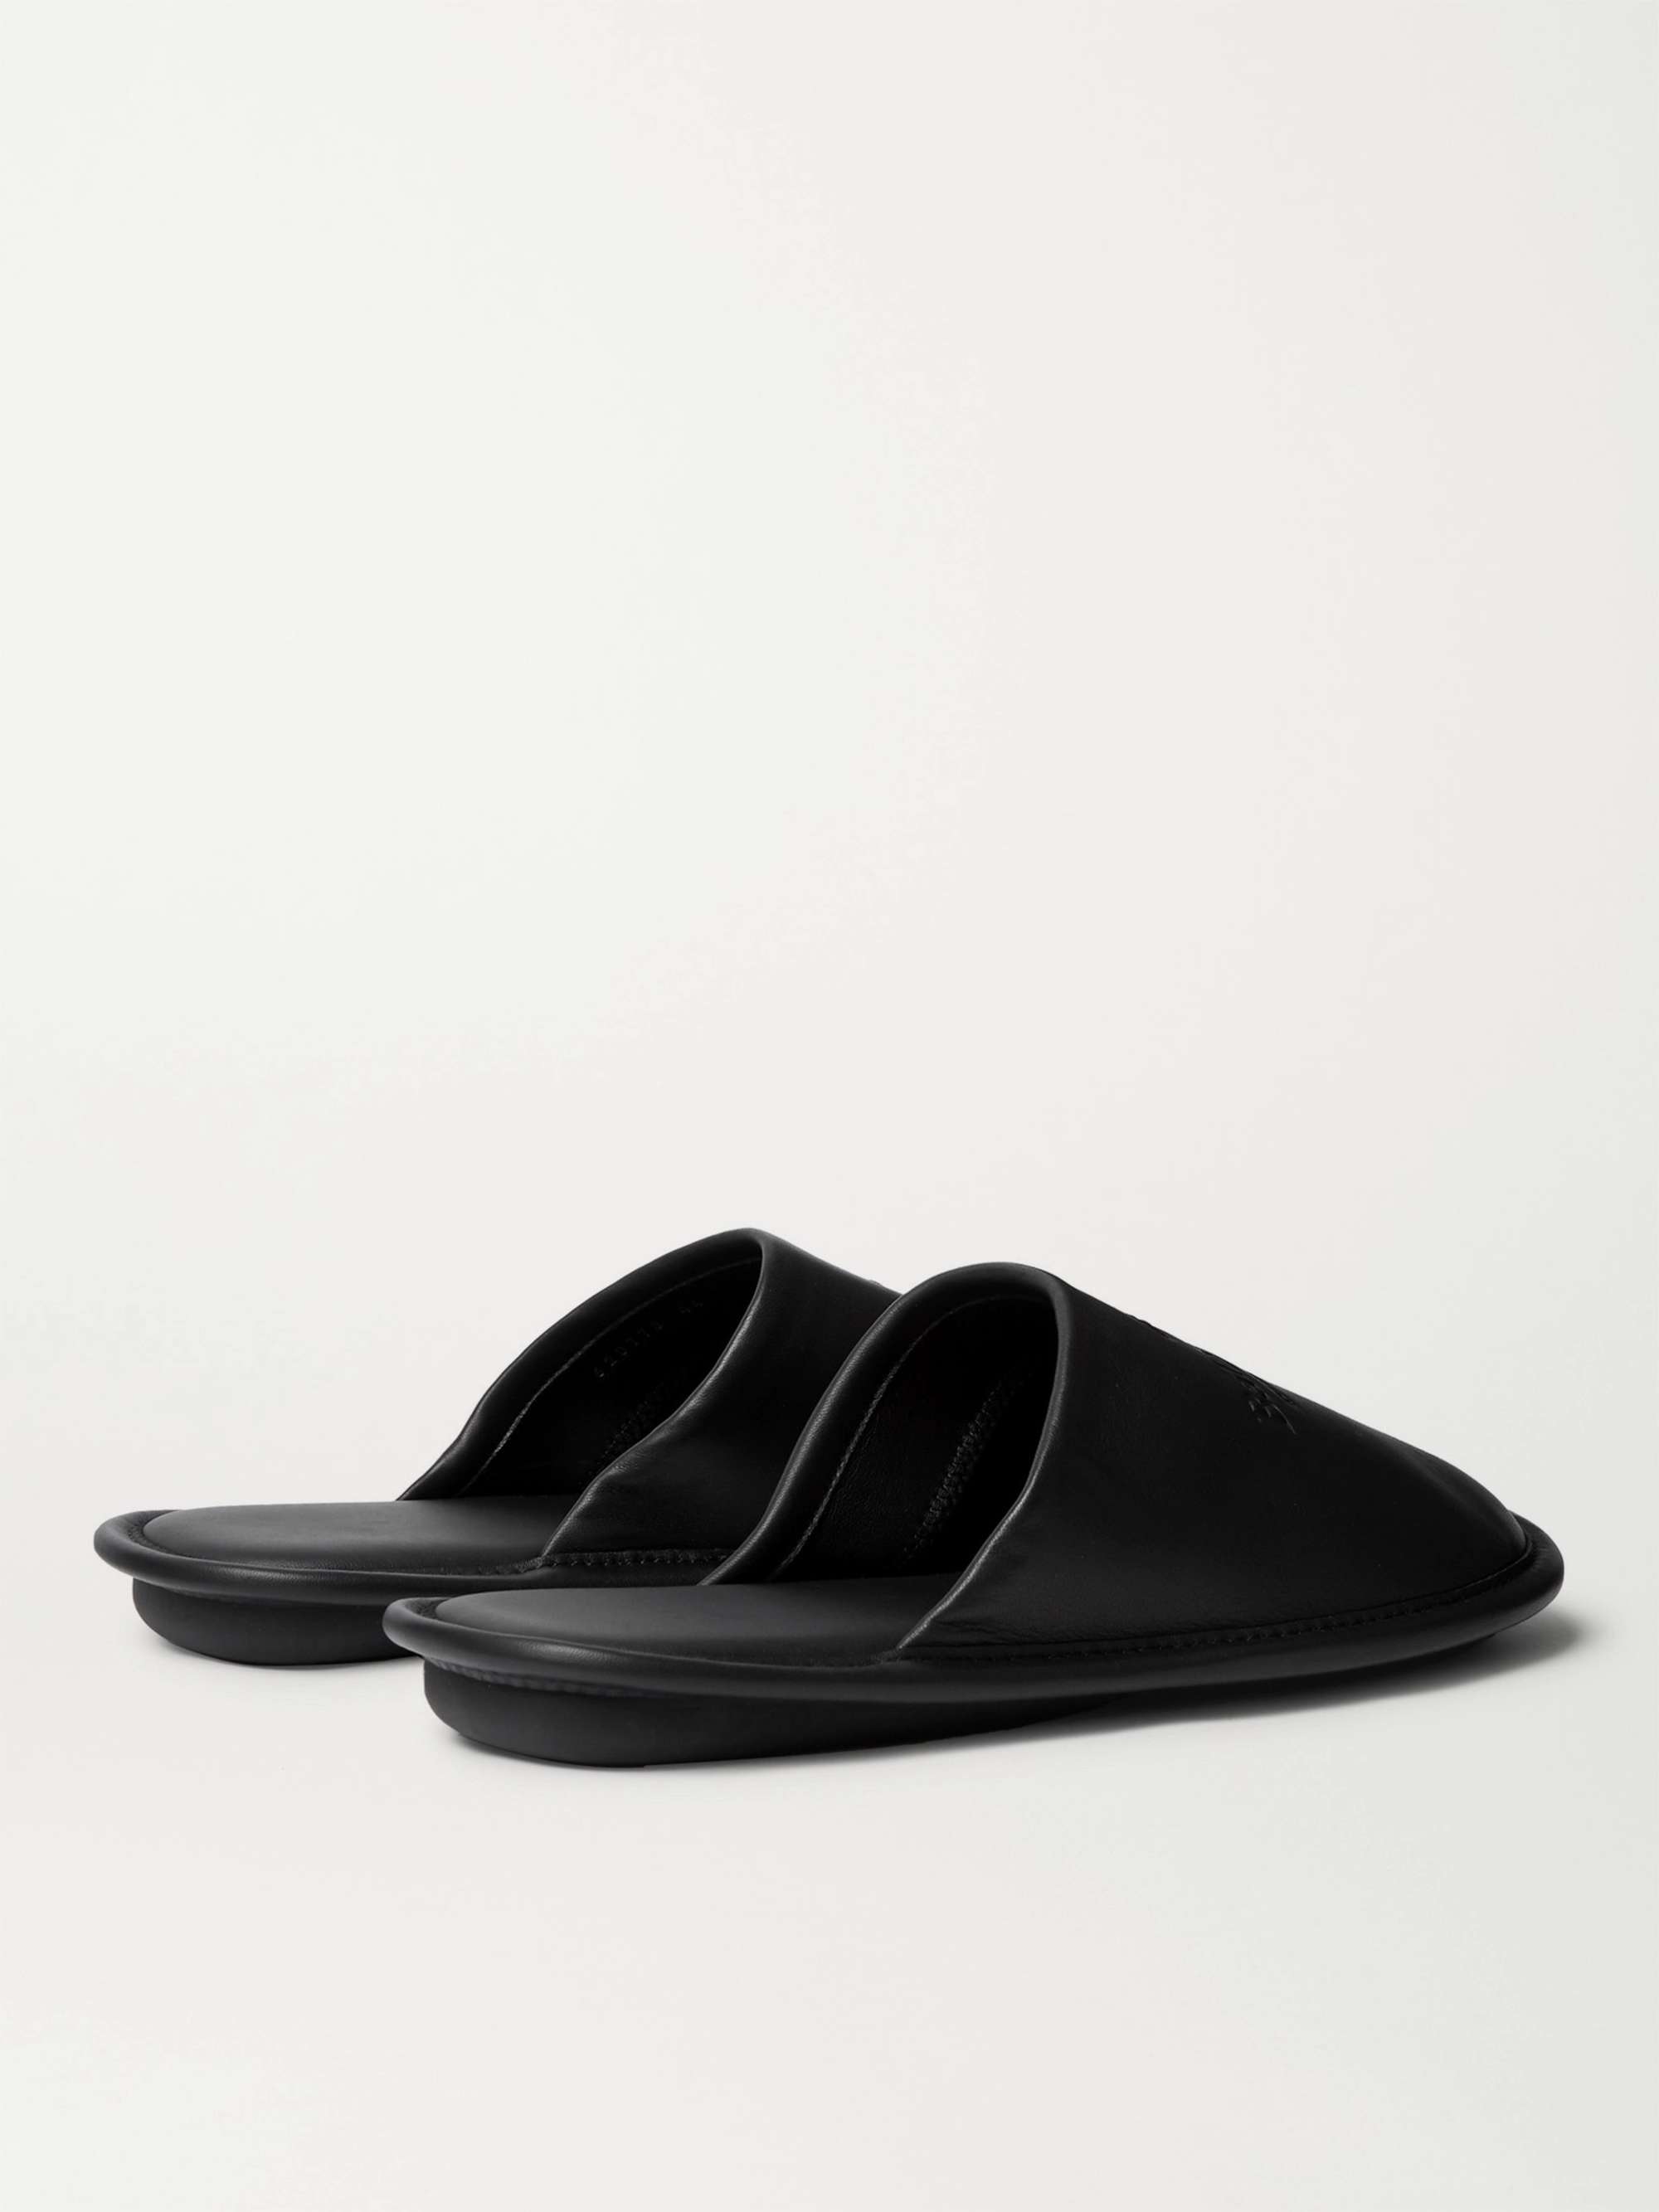 BALENCIAGA Home Logo-Debossed Leather Slippers